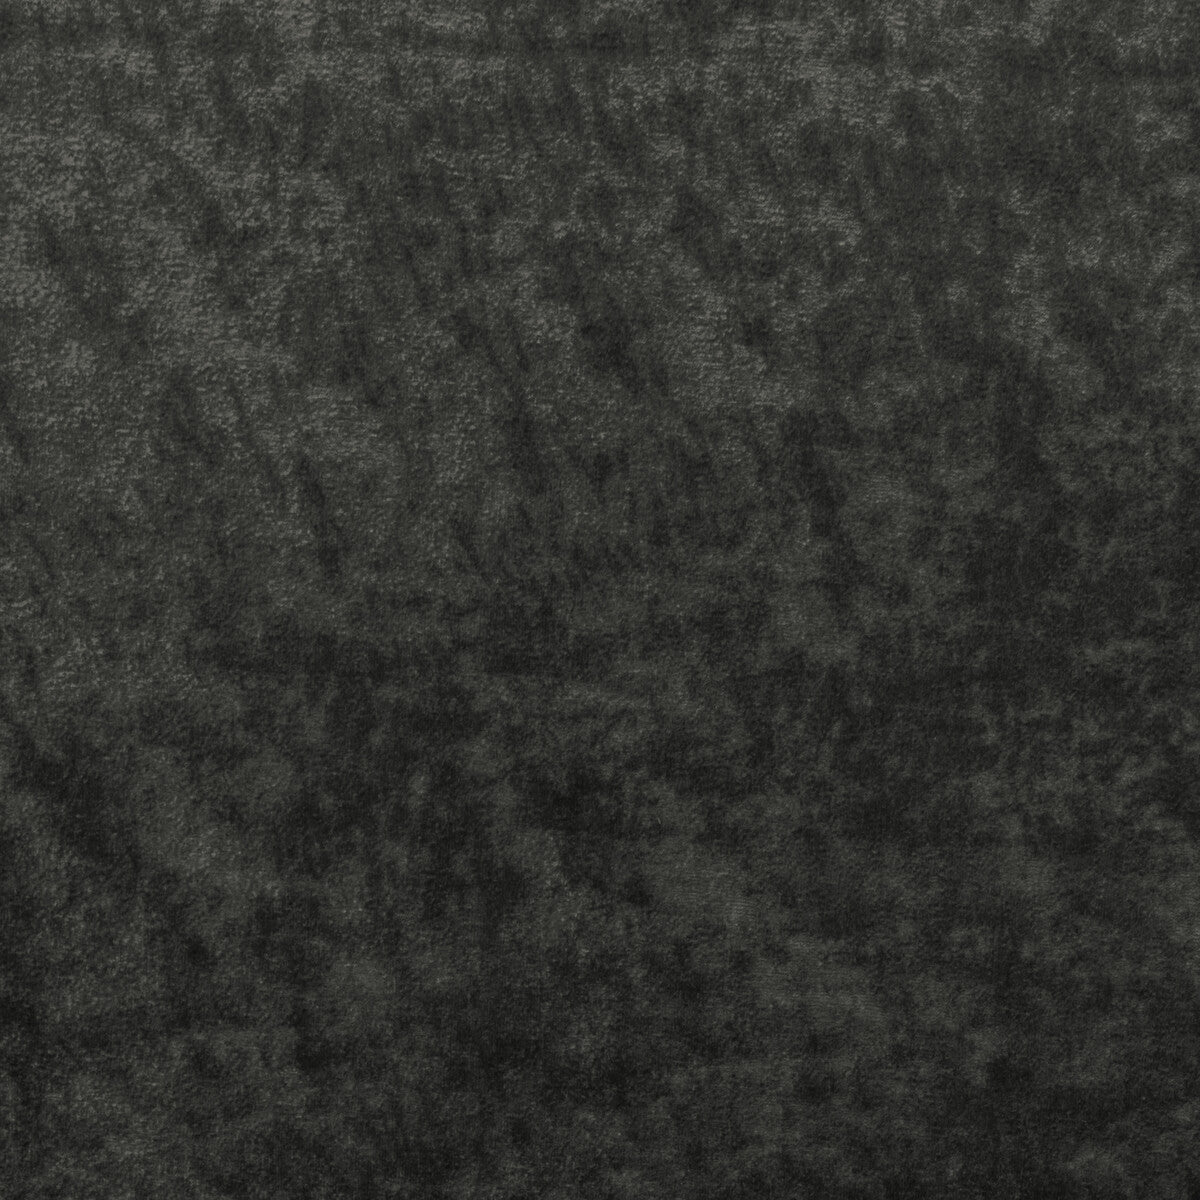 Triumphant fabric in slate color - pattern 36065.21.0 - by Kravet Couture